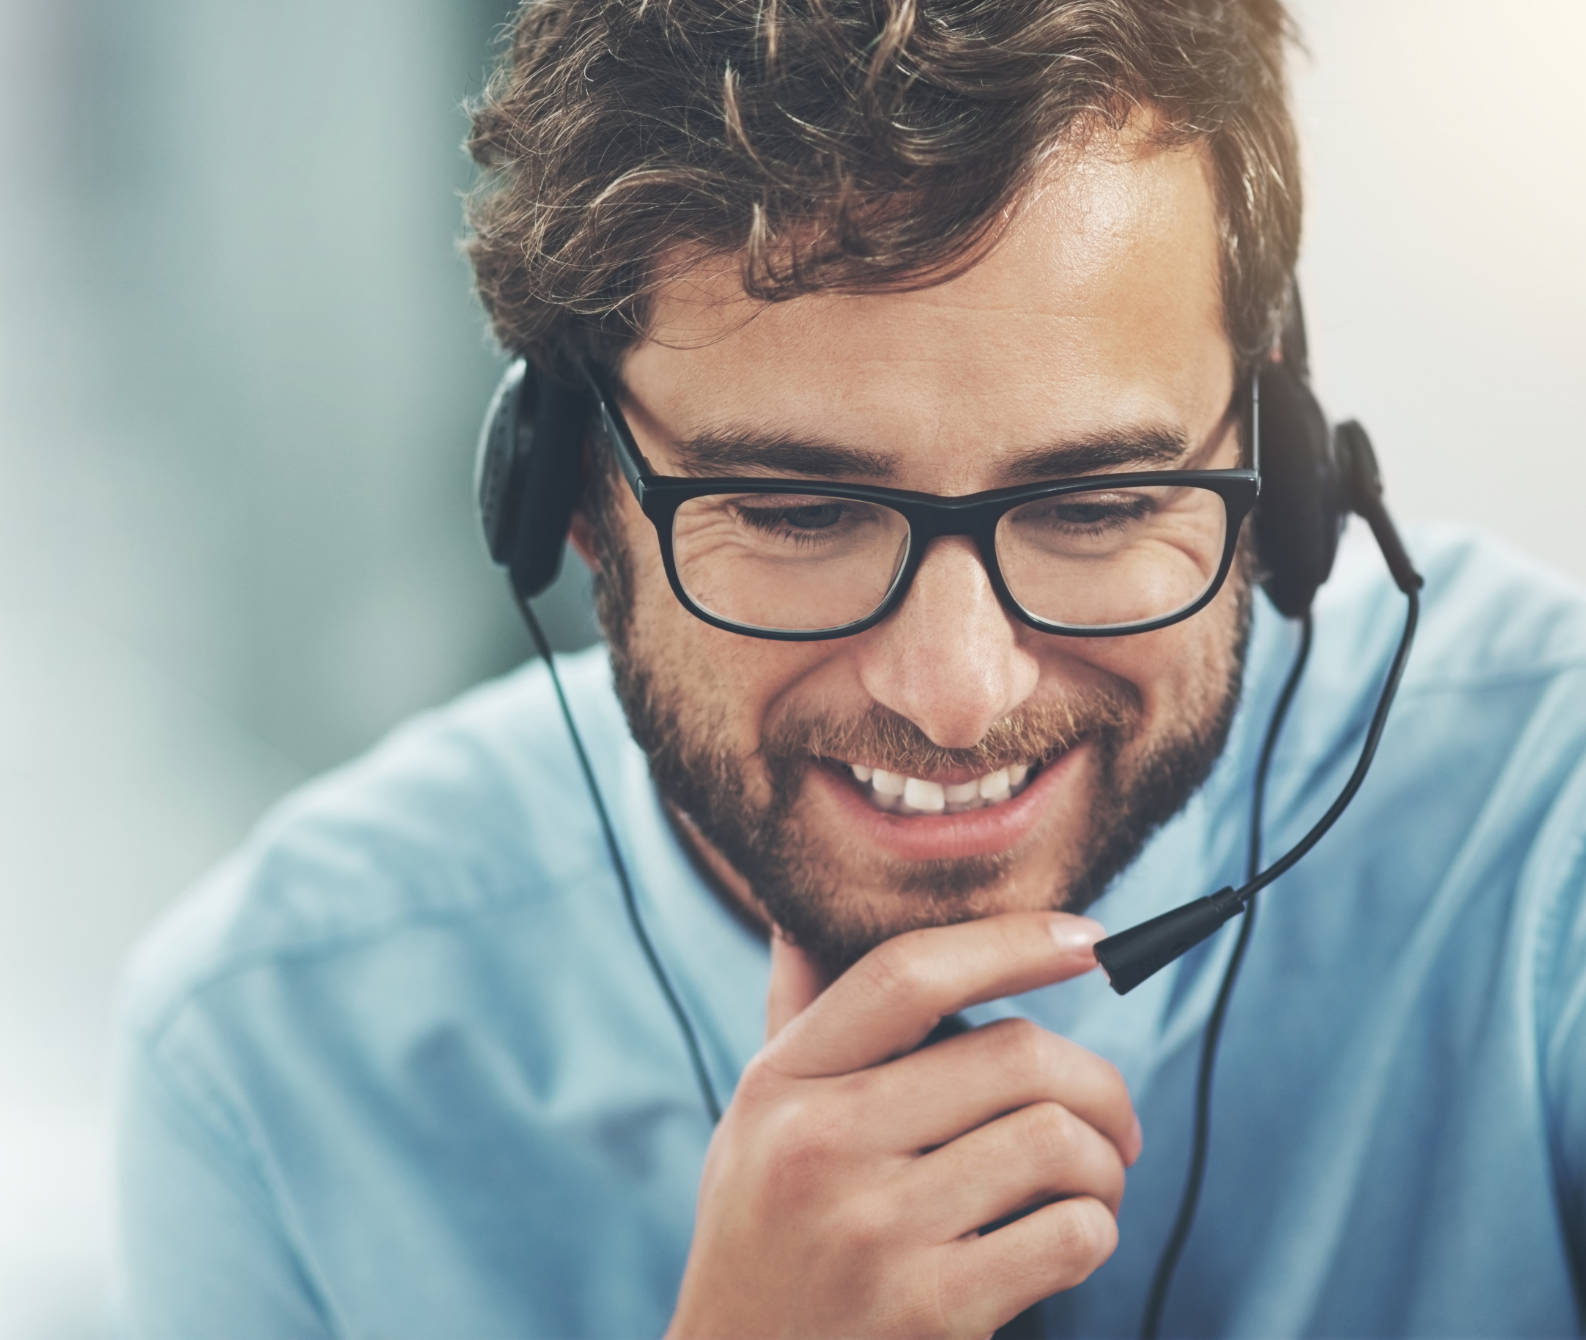 Customer service man with glasses and headset leaning forward with chin in hands and smiling